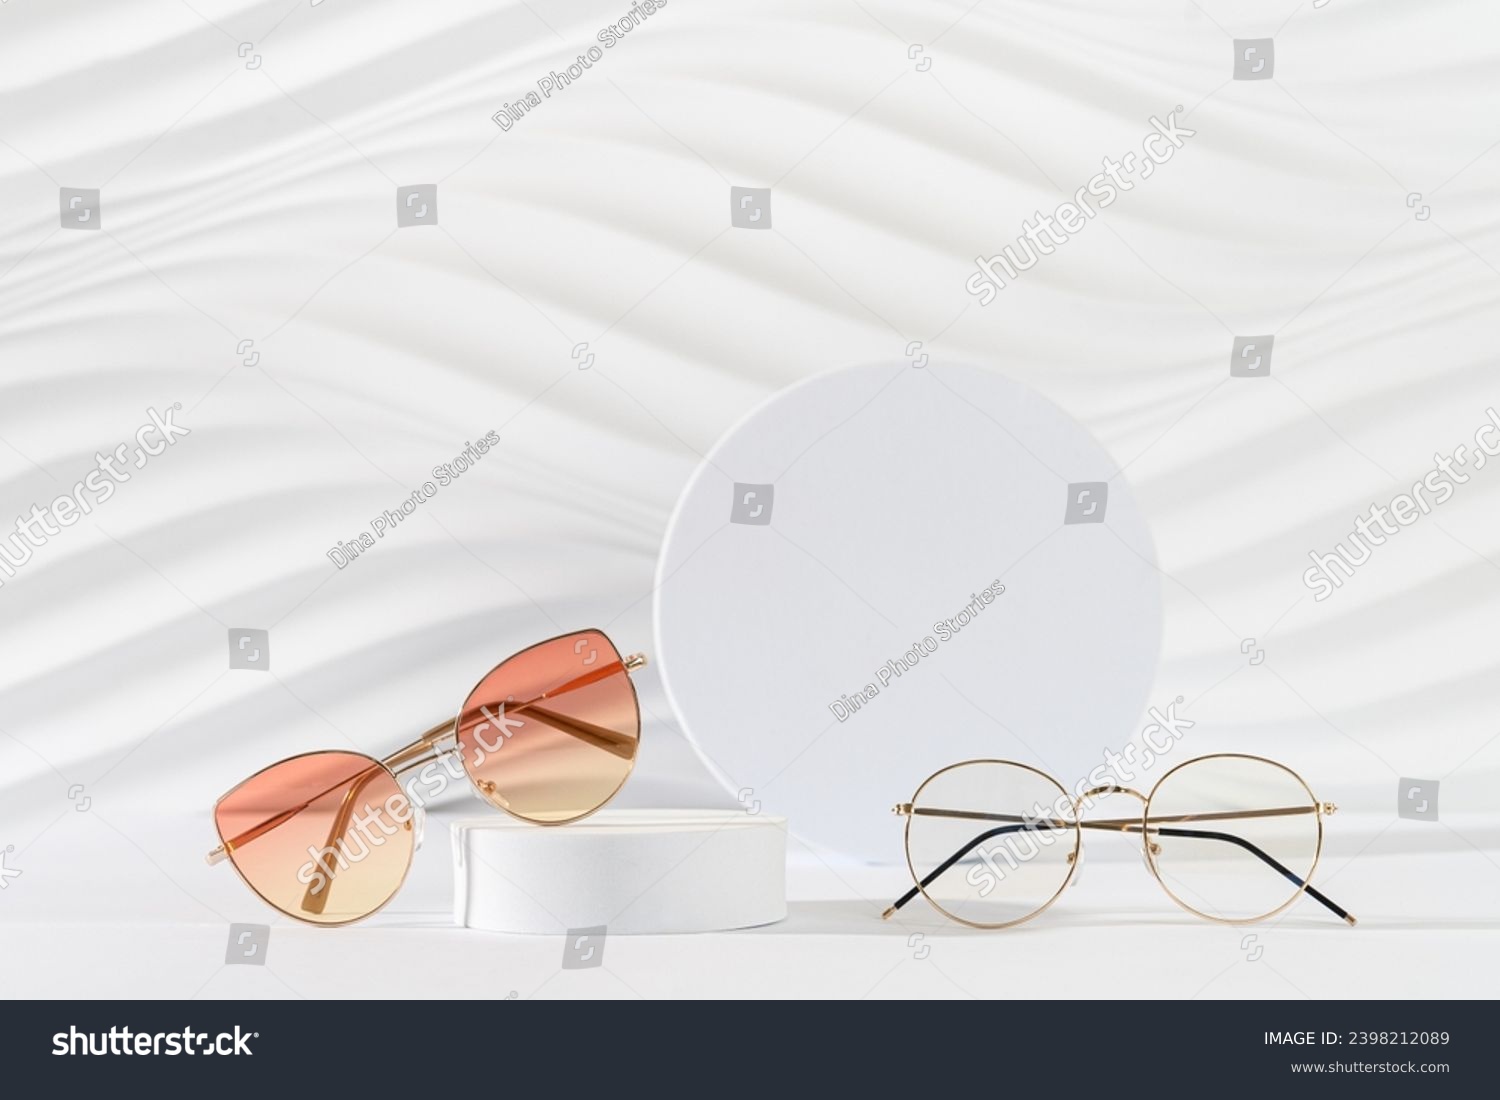 Sunglasses and glasses sale concept. Trendy sunglasses on podiums on a white background. Trendy Fashion summer accessories. Copy space. Promotion, sale. Optic store discount poster. Minimal #2398212089